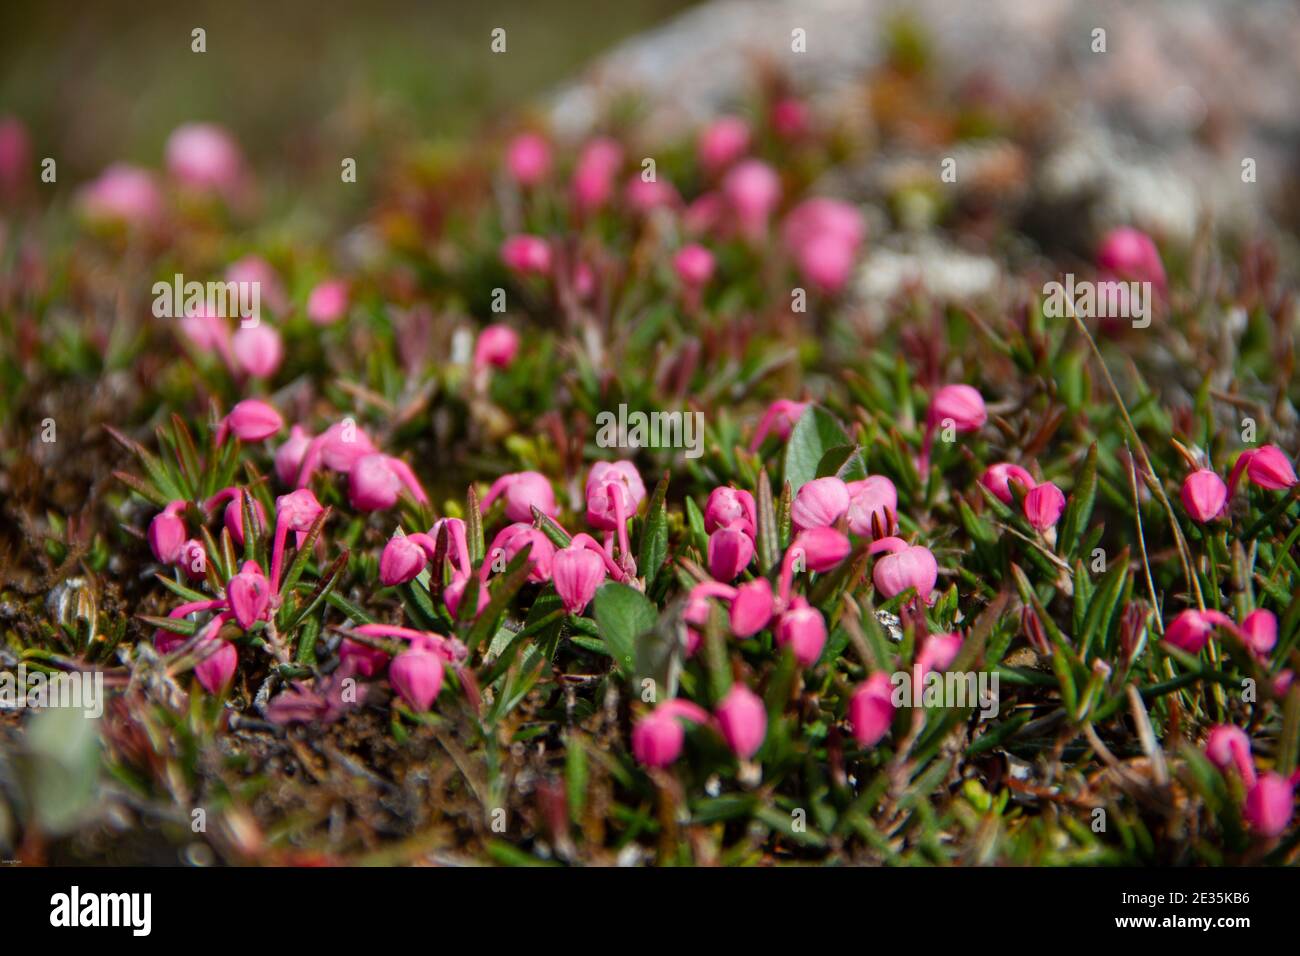 Bog rosemary, a species of flowering plant in the heath family Ericaceae, native to northern parts of the Northern Hemisphere. Found only in bogs. Stock Photo